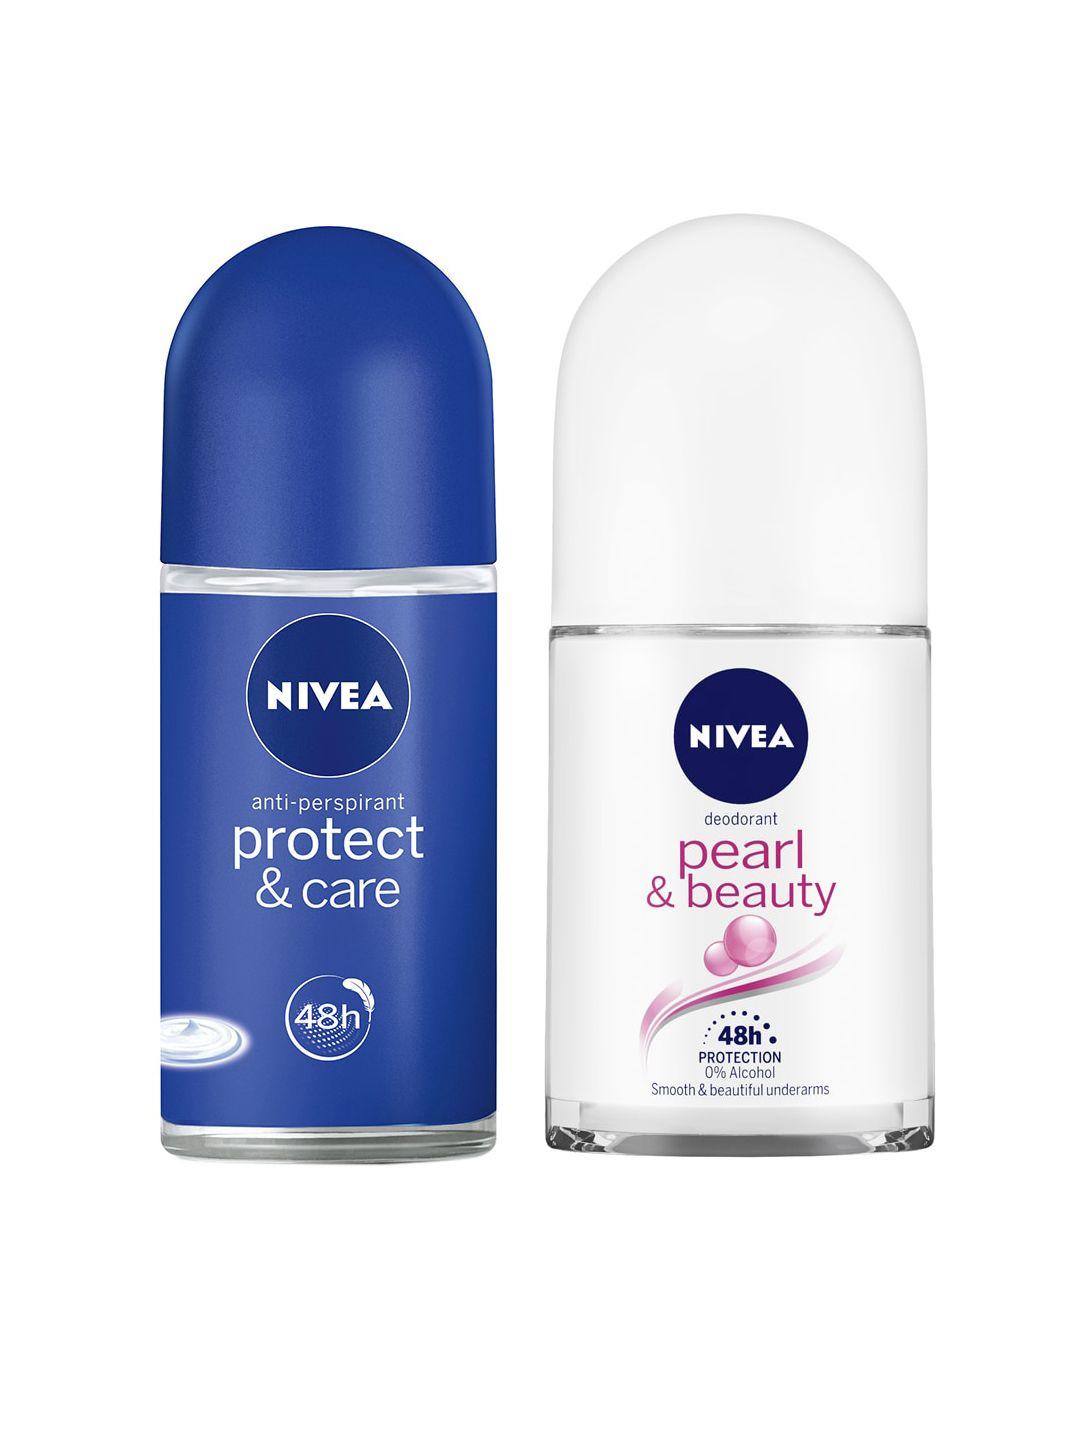 nivea set of protect & care with pearl & beauty roll-on deodorants